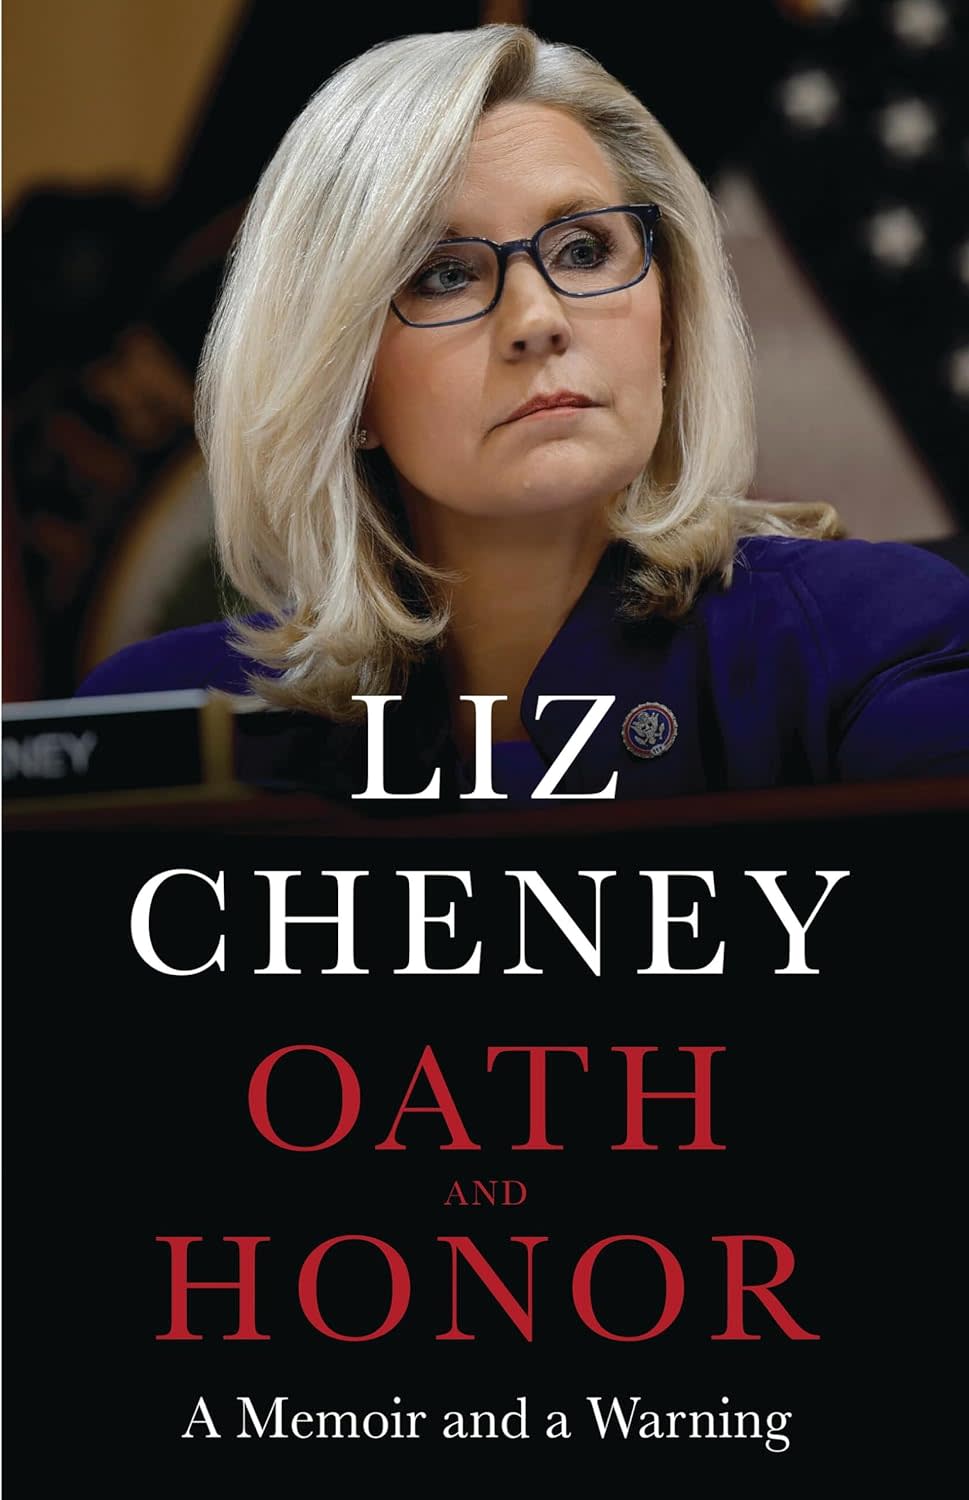 "Oath and Honor: A Memoir and a Warning," by Liz Cheney